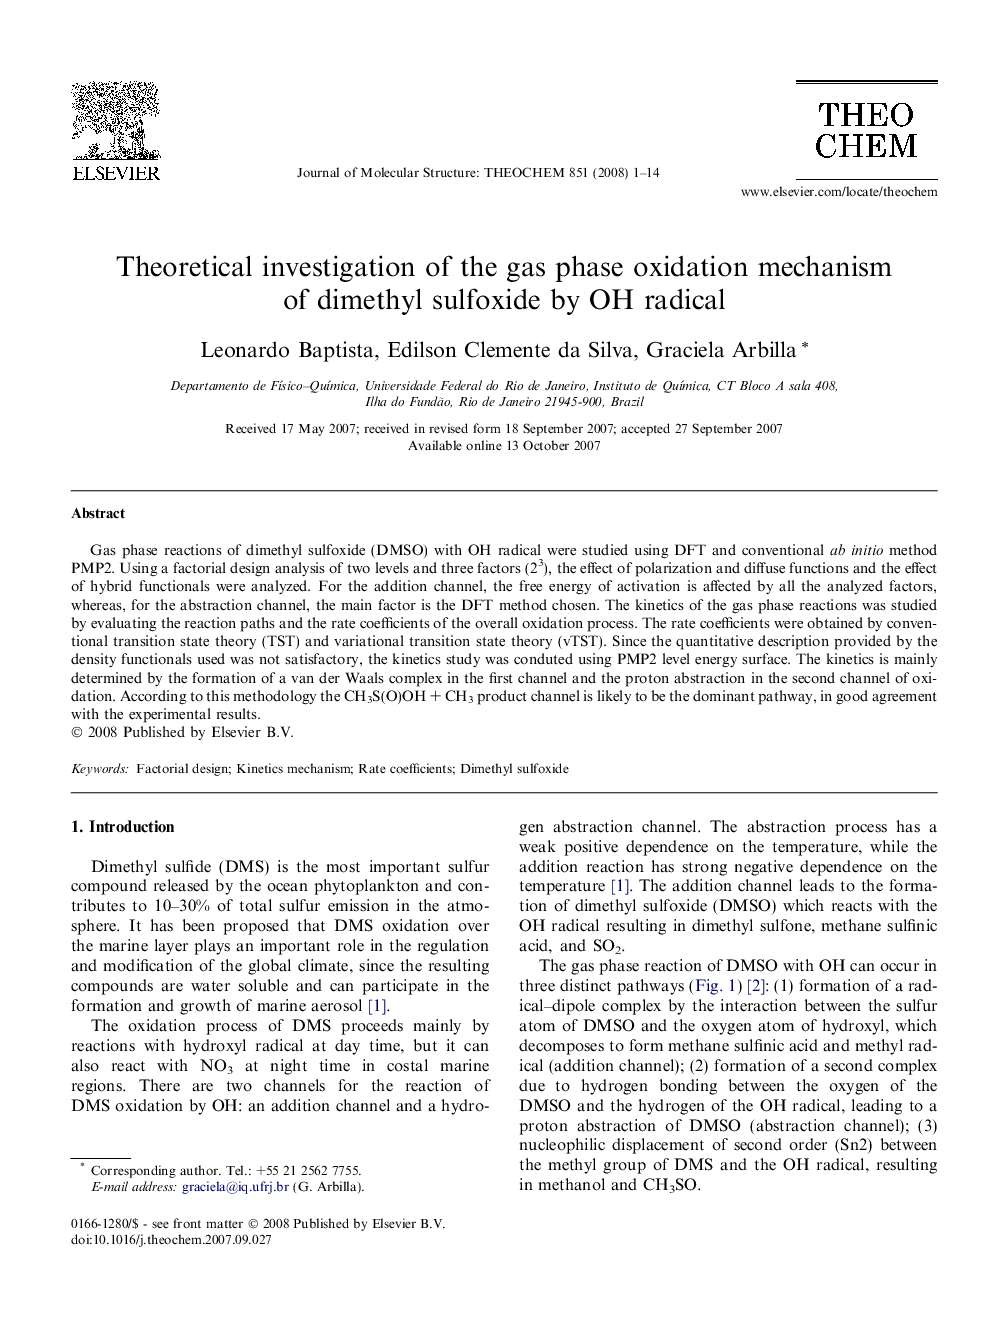 Theoretical investigation of the gas phase oxidation mechanism of dimethyl sulfoxide by OH radical